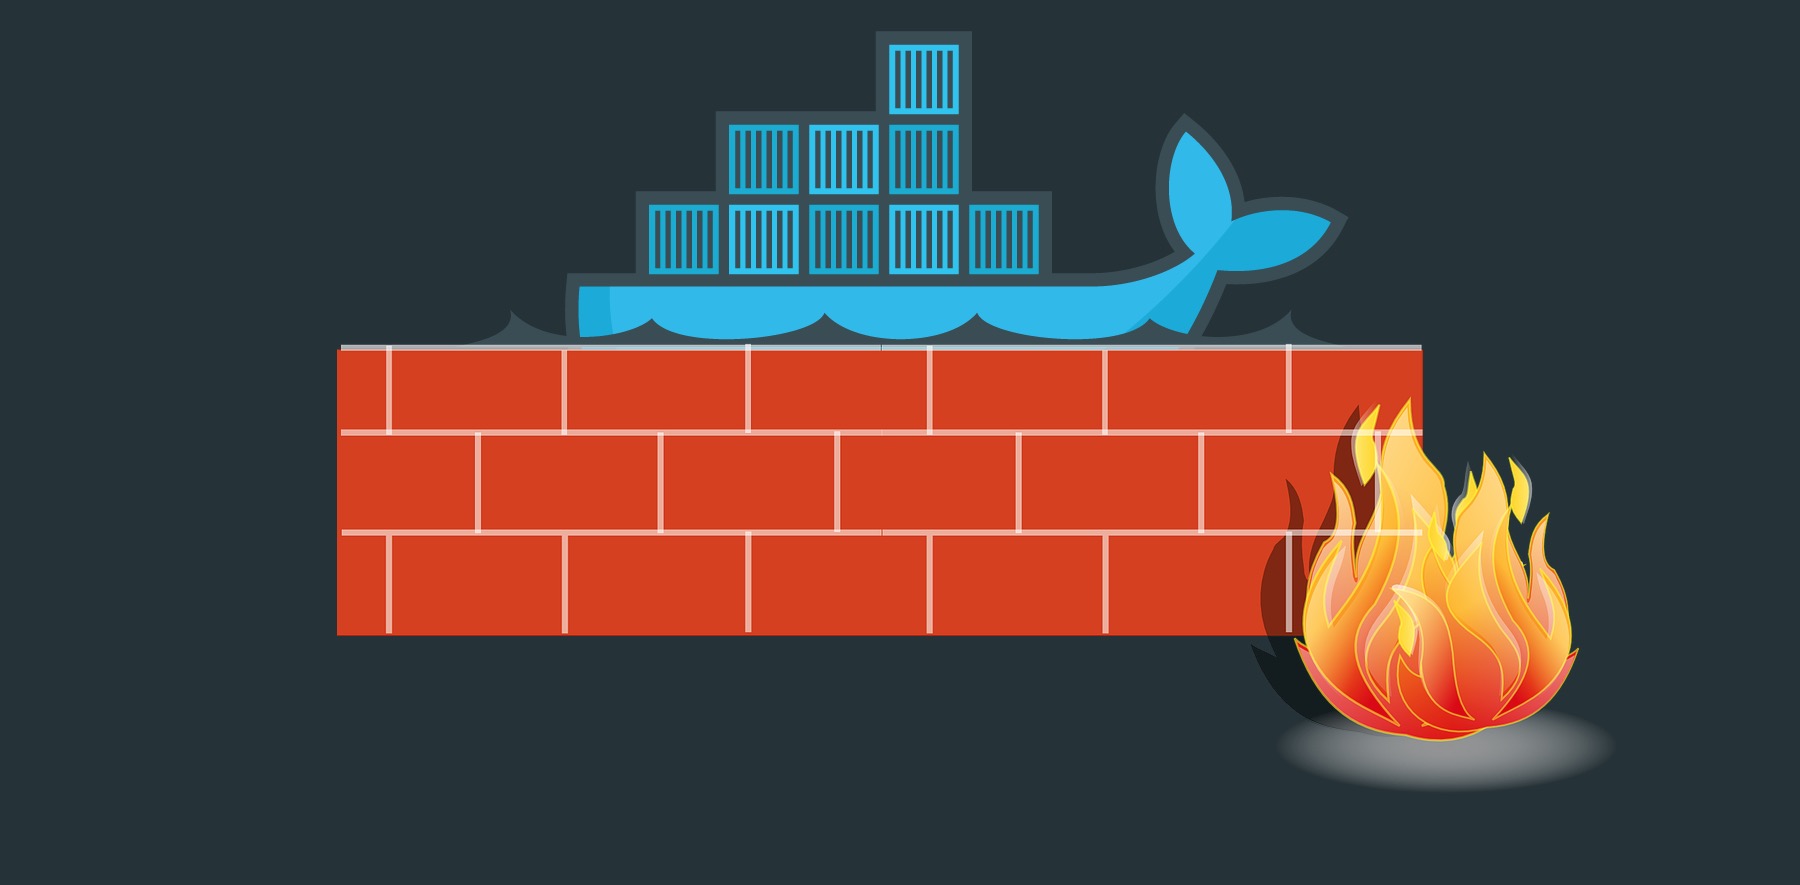 Using docker with ufw